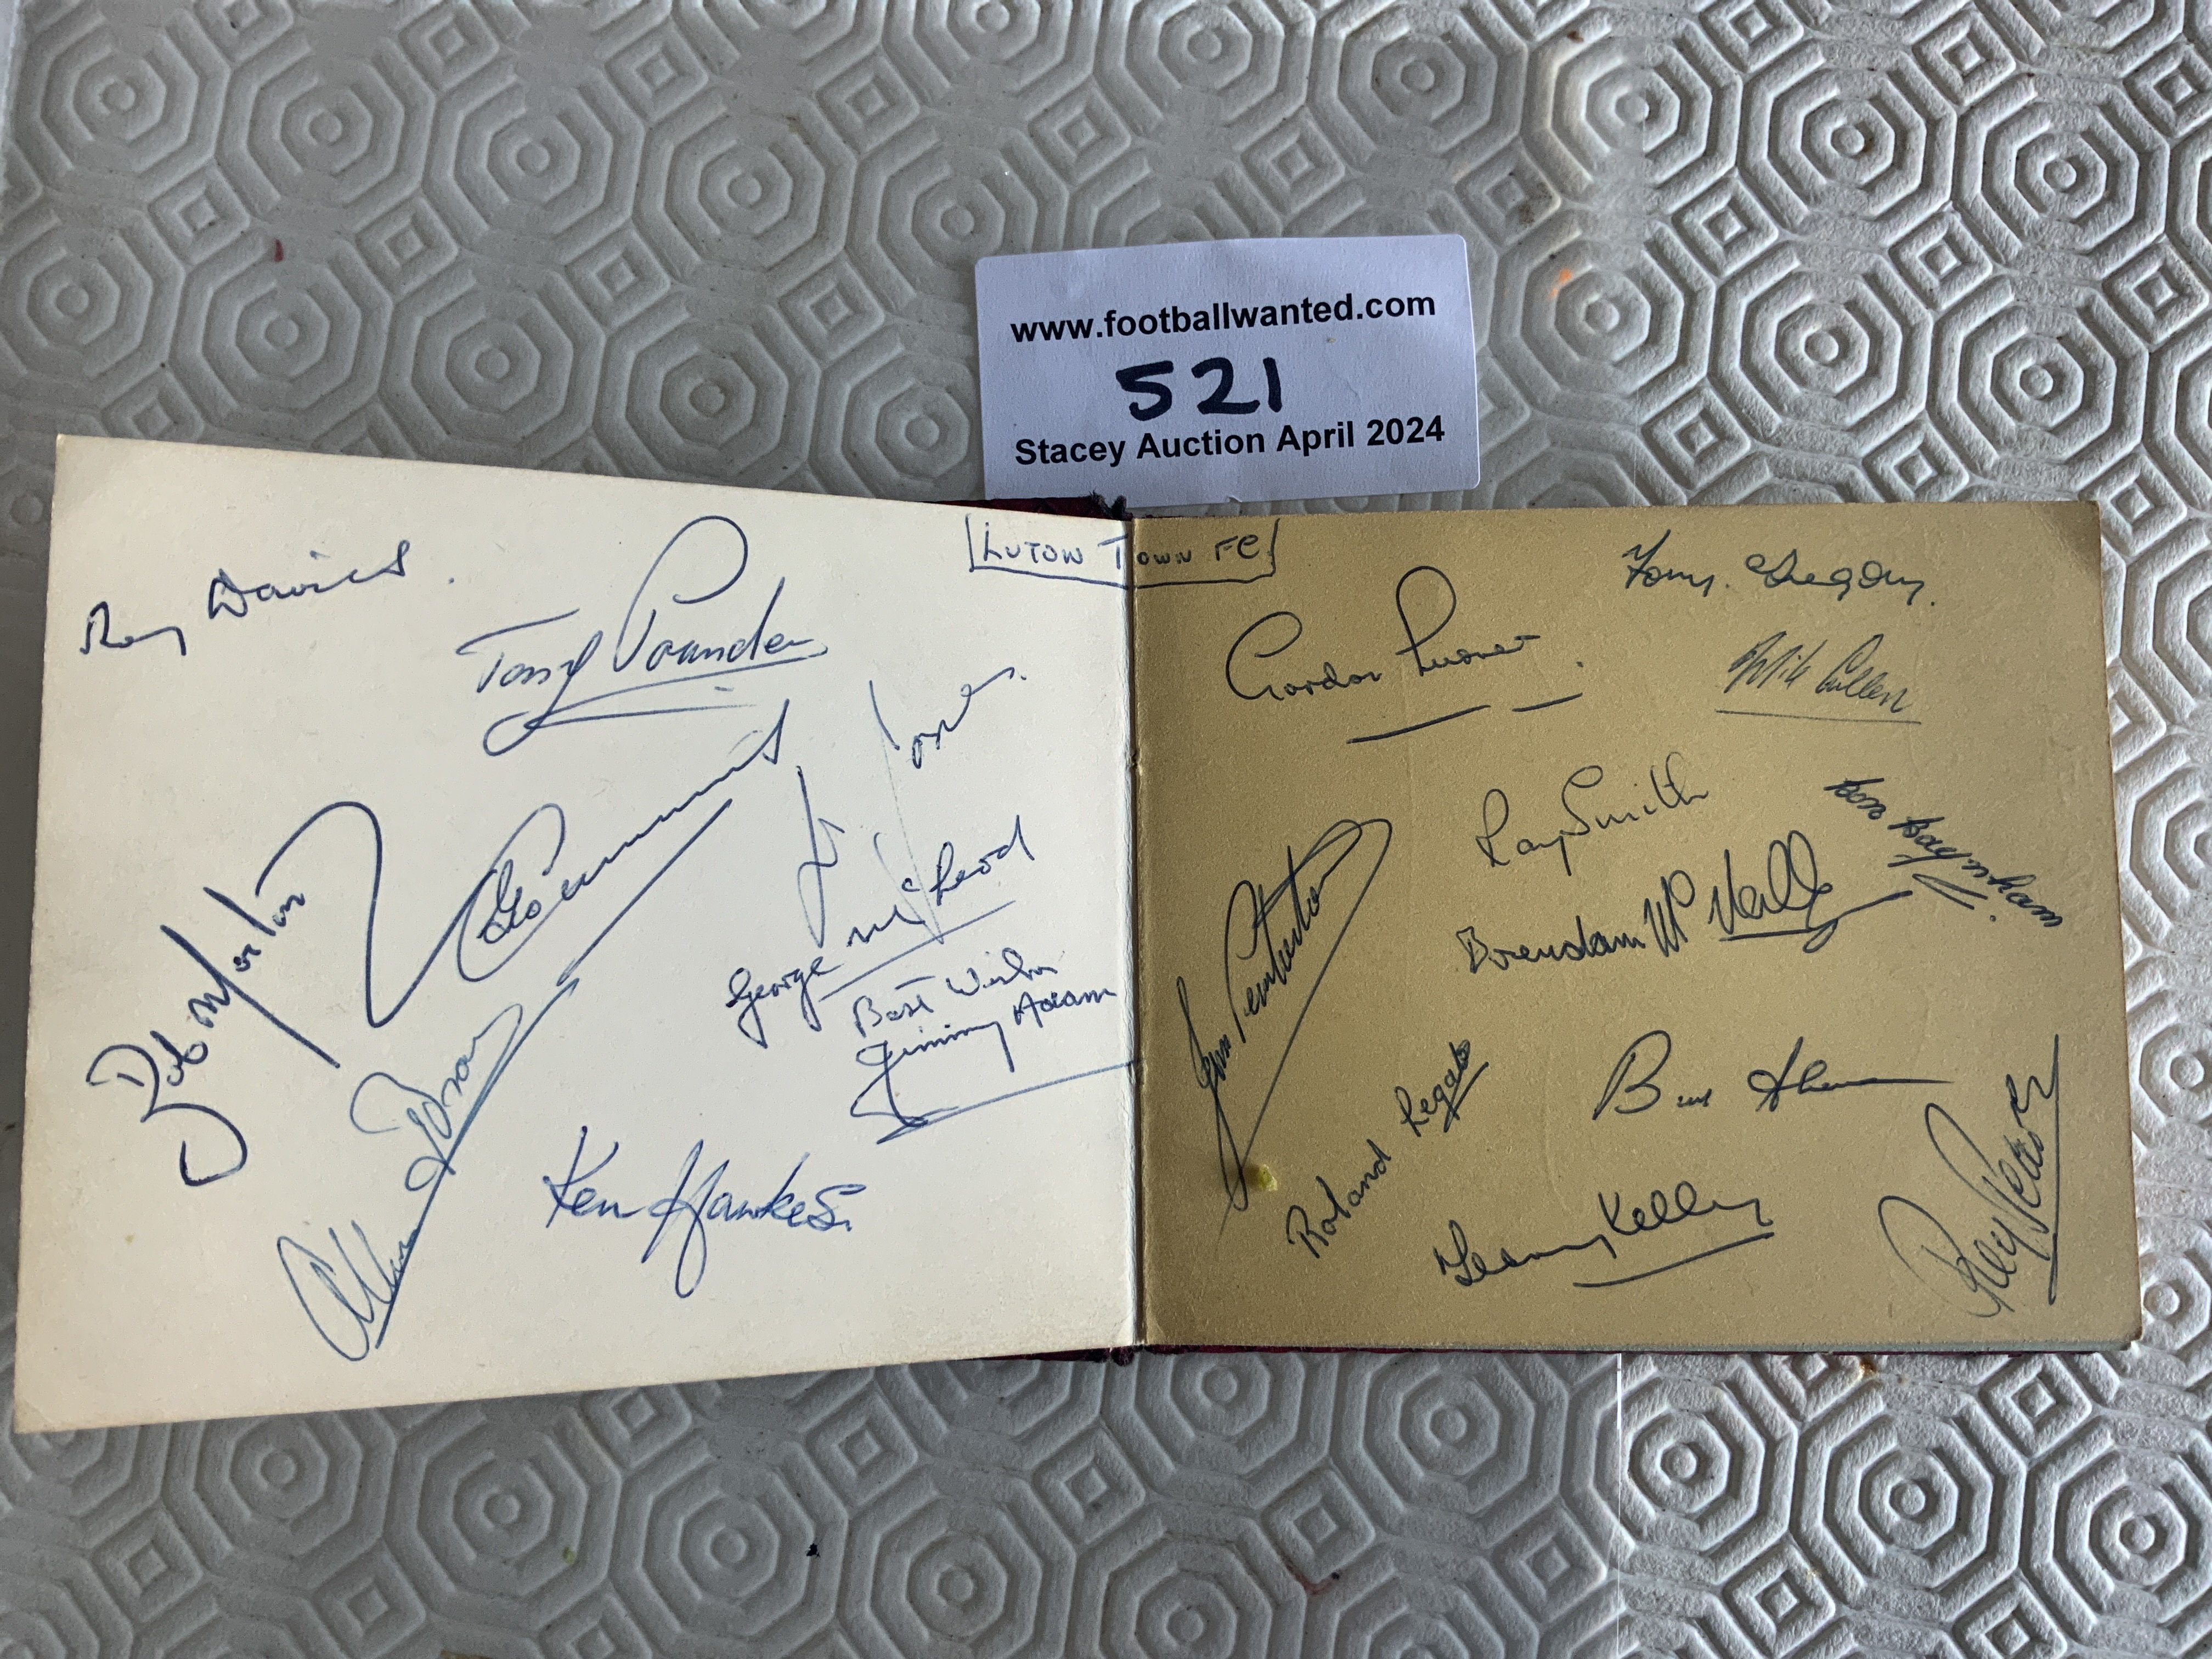 Manchester United 57/58 Busby Babes Autograph Book - Image 2 of 4